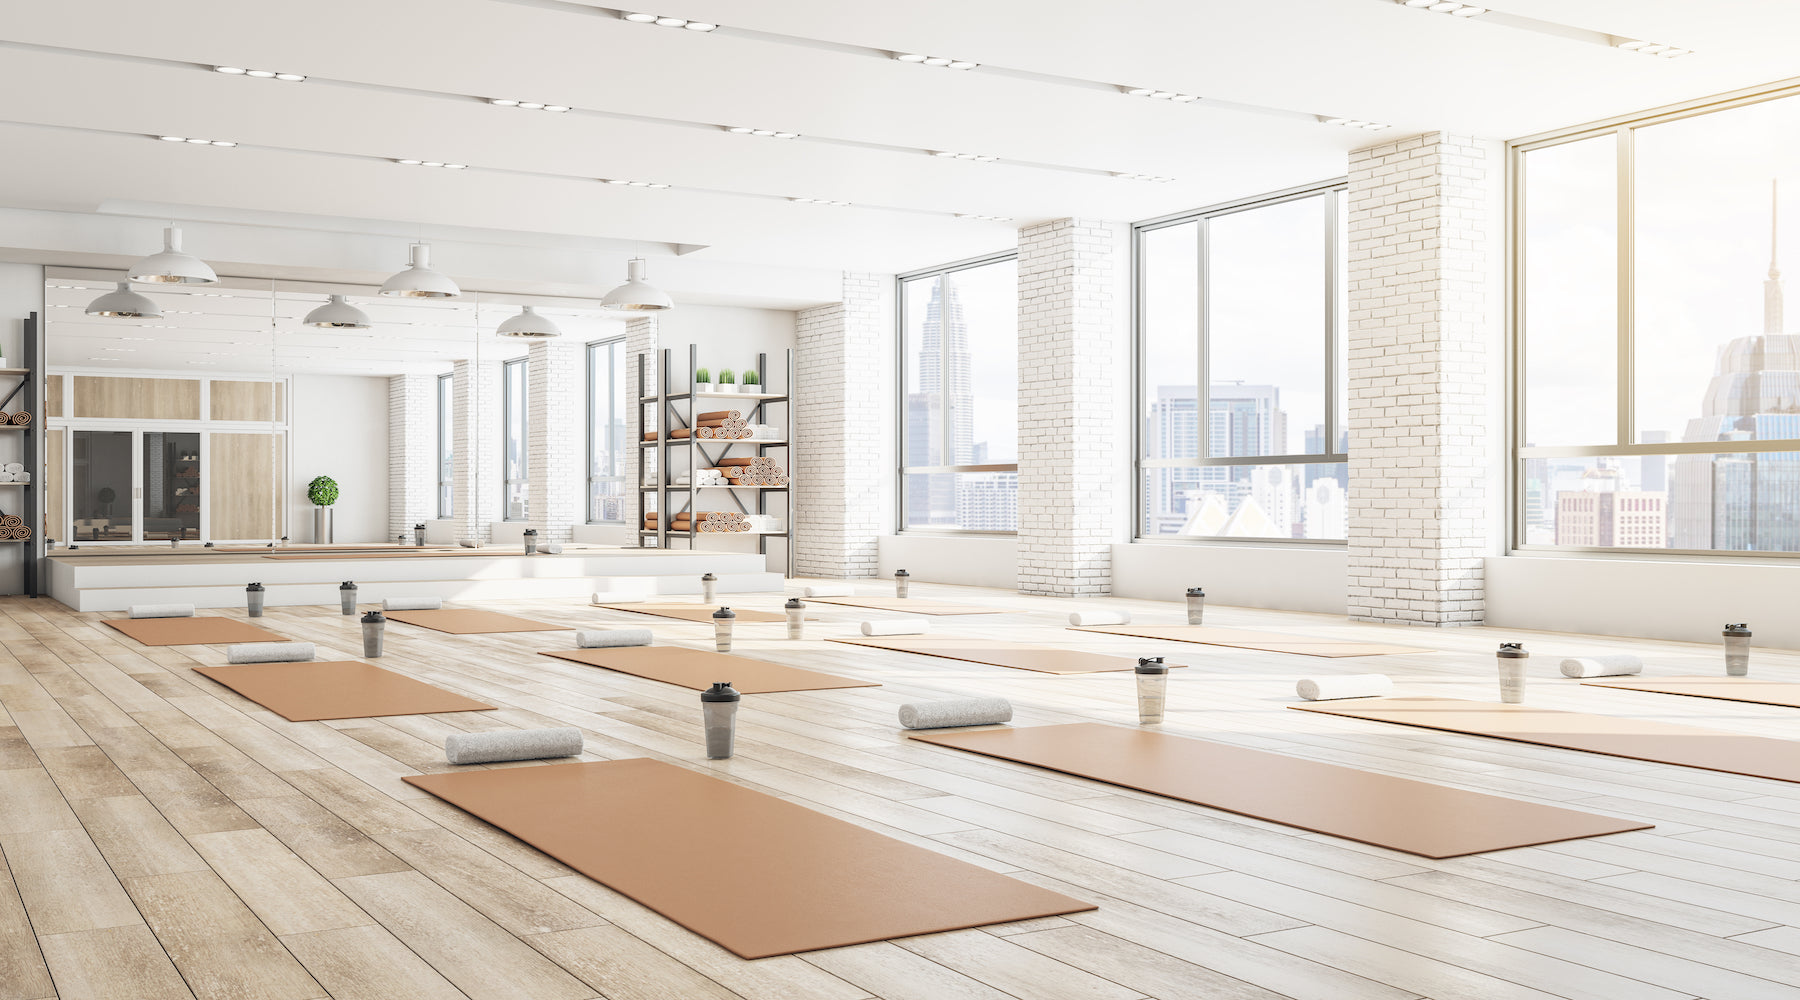 A spacious room with yoga mats, cups, towels, and plants.